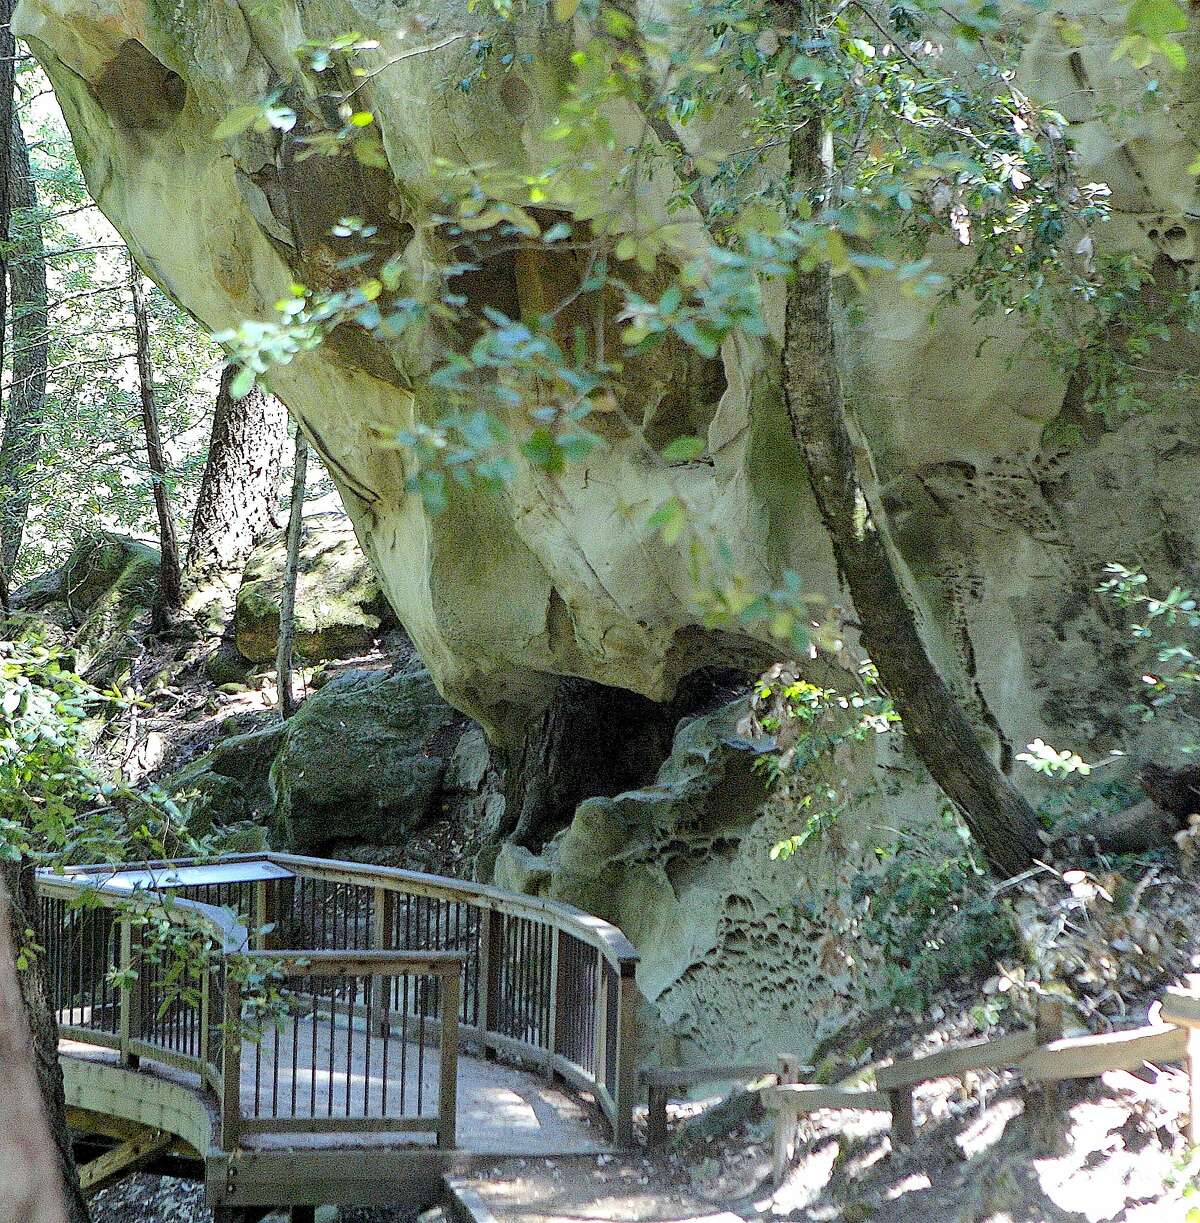 A new trail in El Corte de Madera Creek Open Space Preserve leads to the cut-off spur to The Tafoni, a sandstone monolith with viewing deck